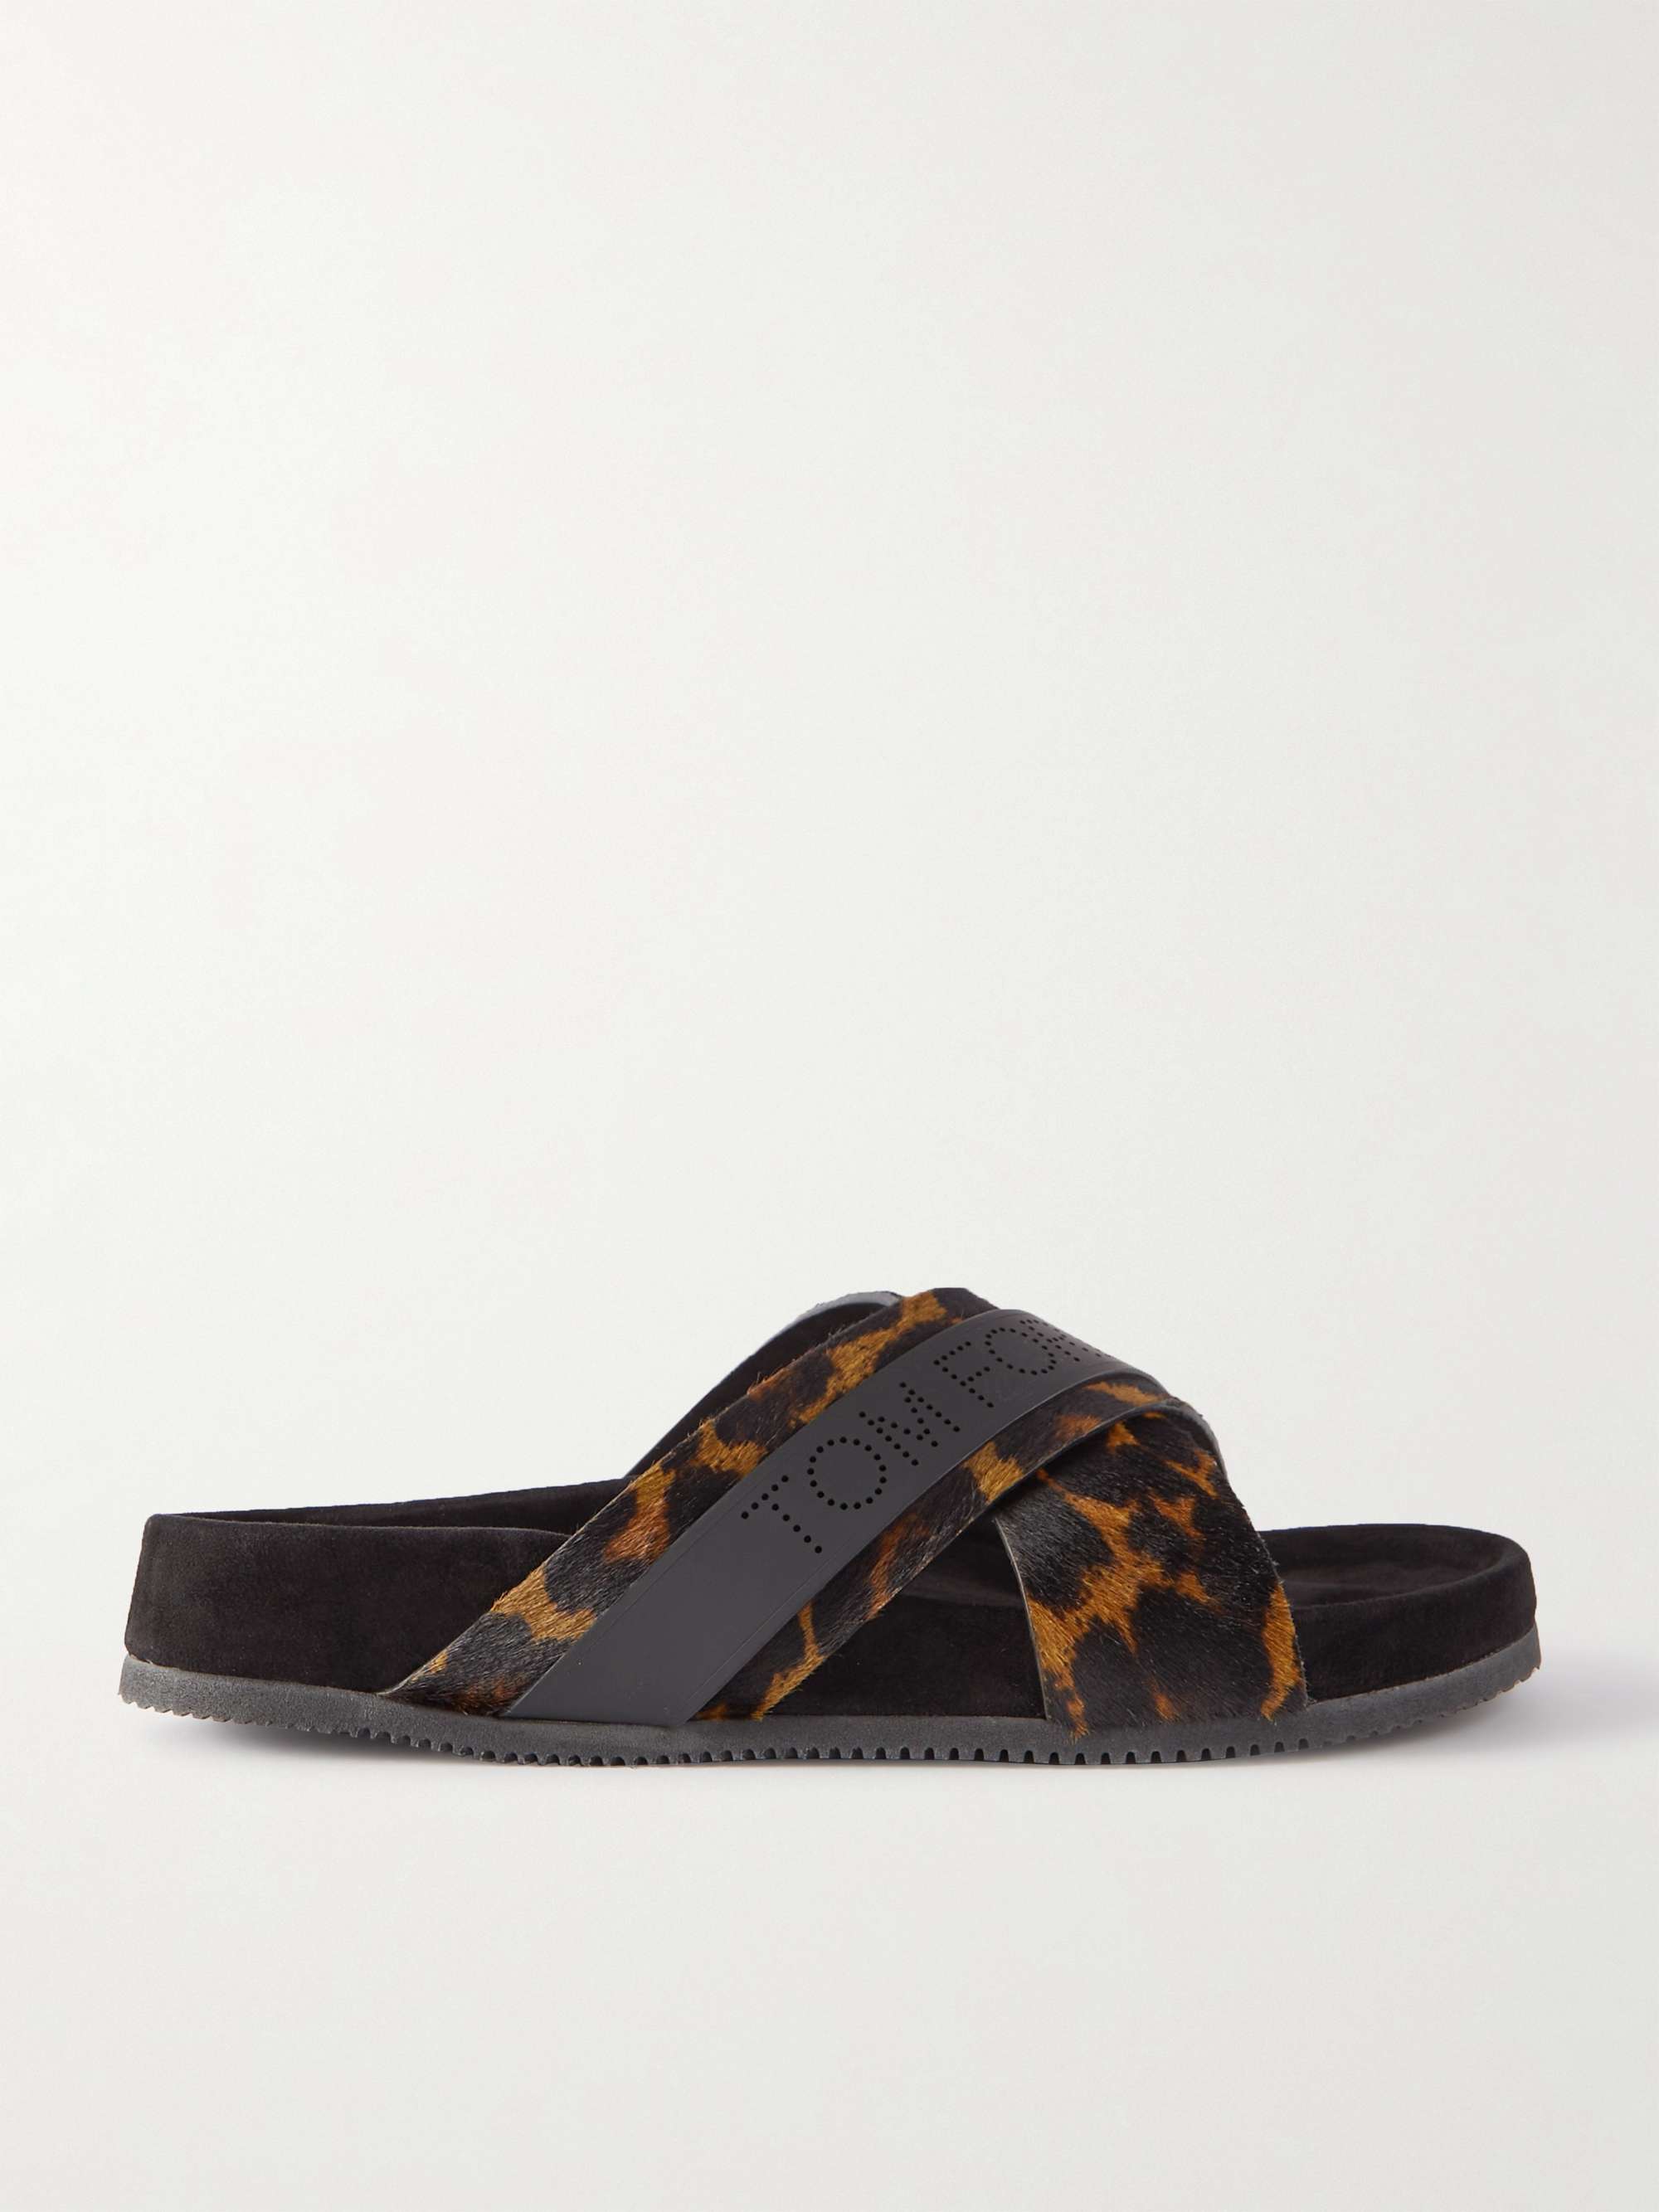 TOM FORD Wicklow Leopard-Print Calf Hair and Leather Slides